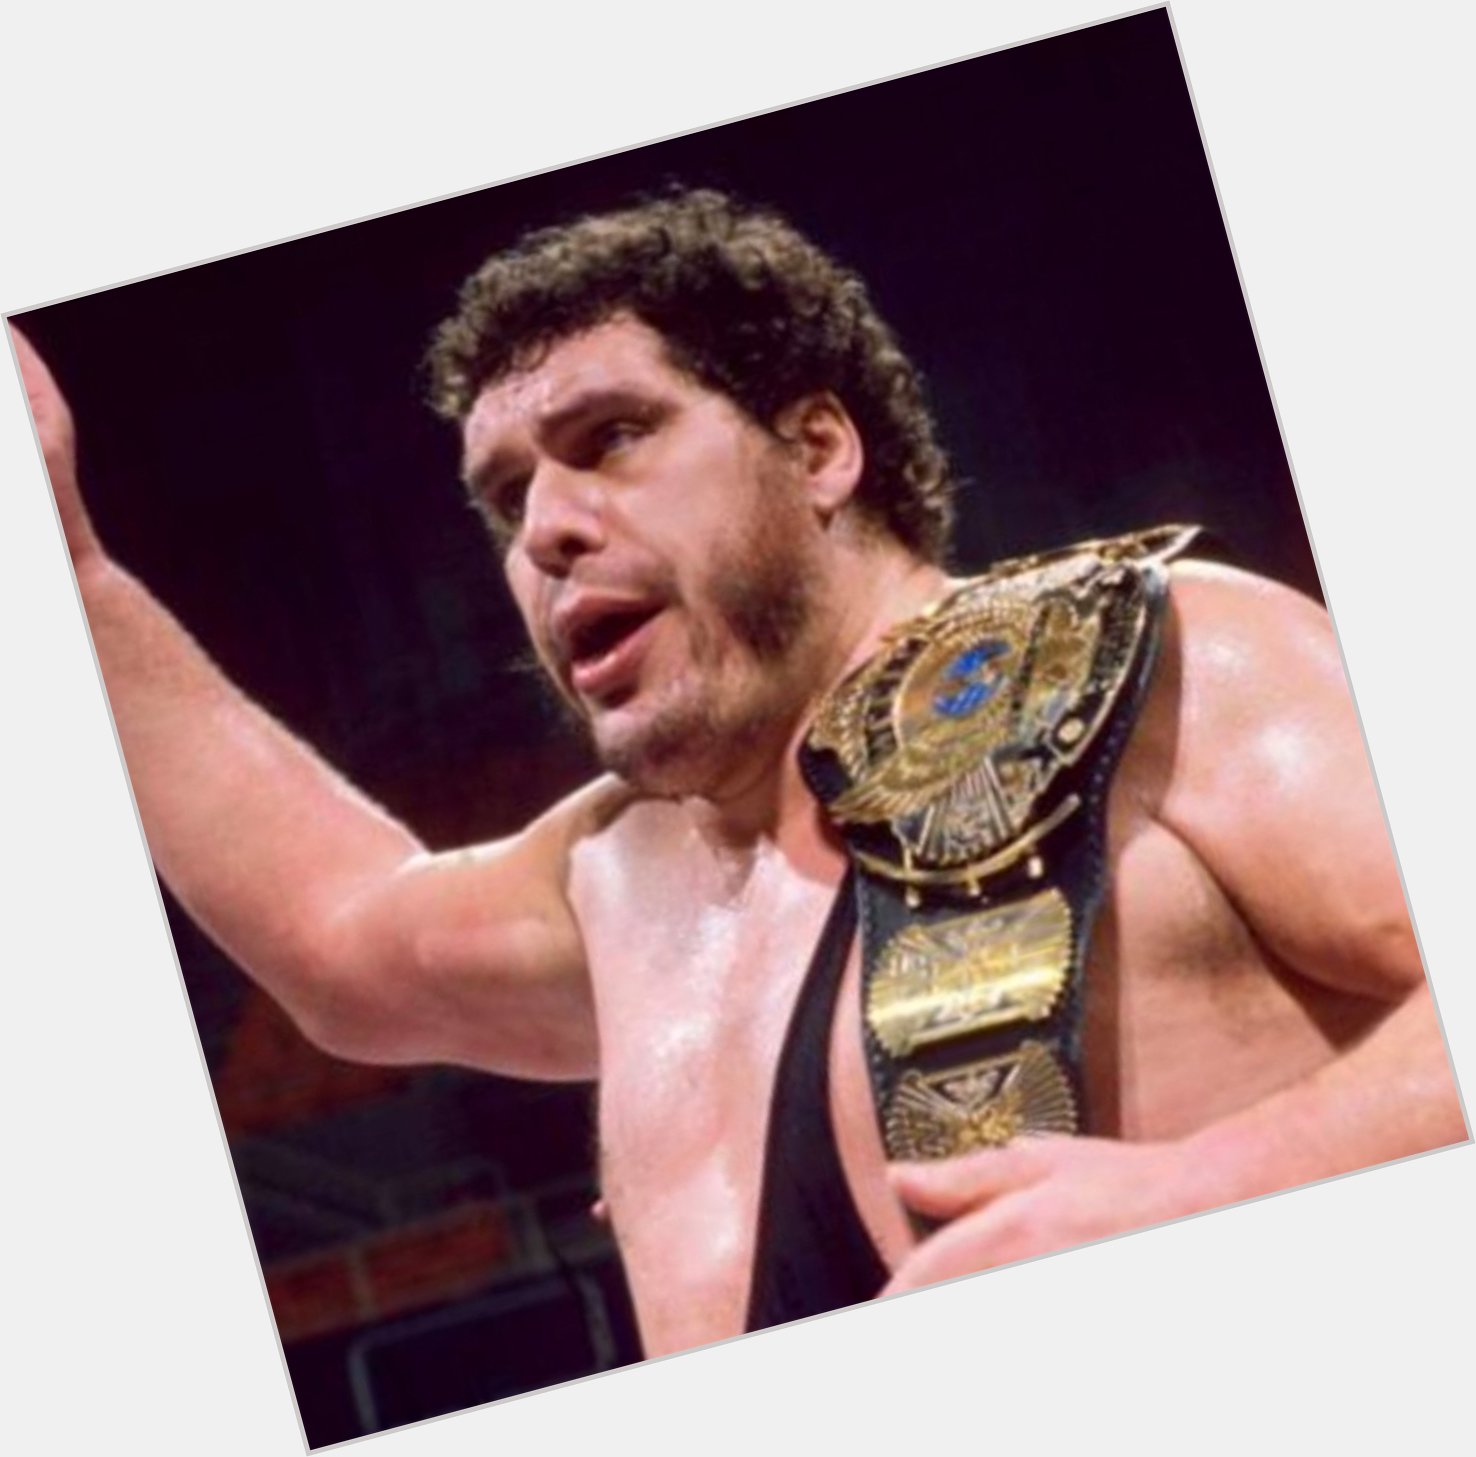 Wishing the late great Andre The Giant a Happy 73rd Birthday!  